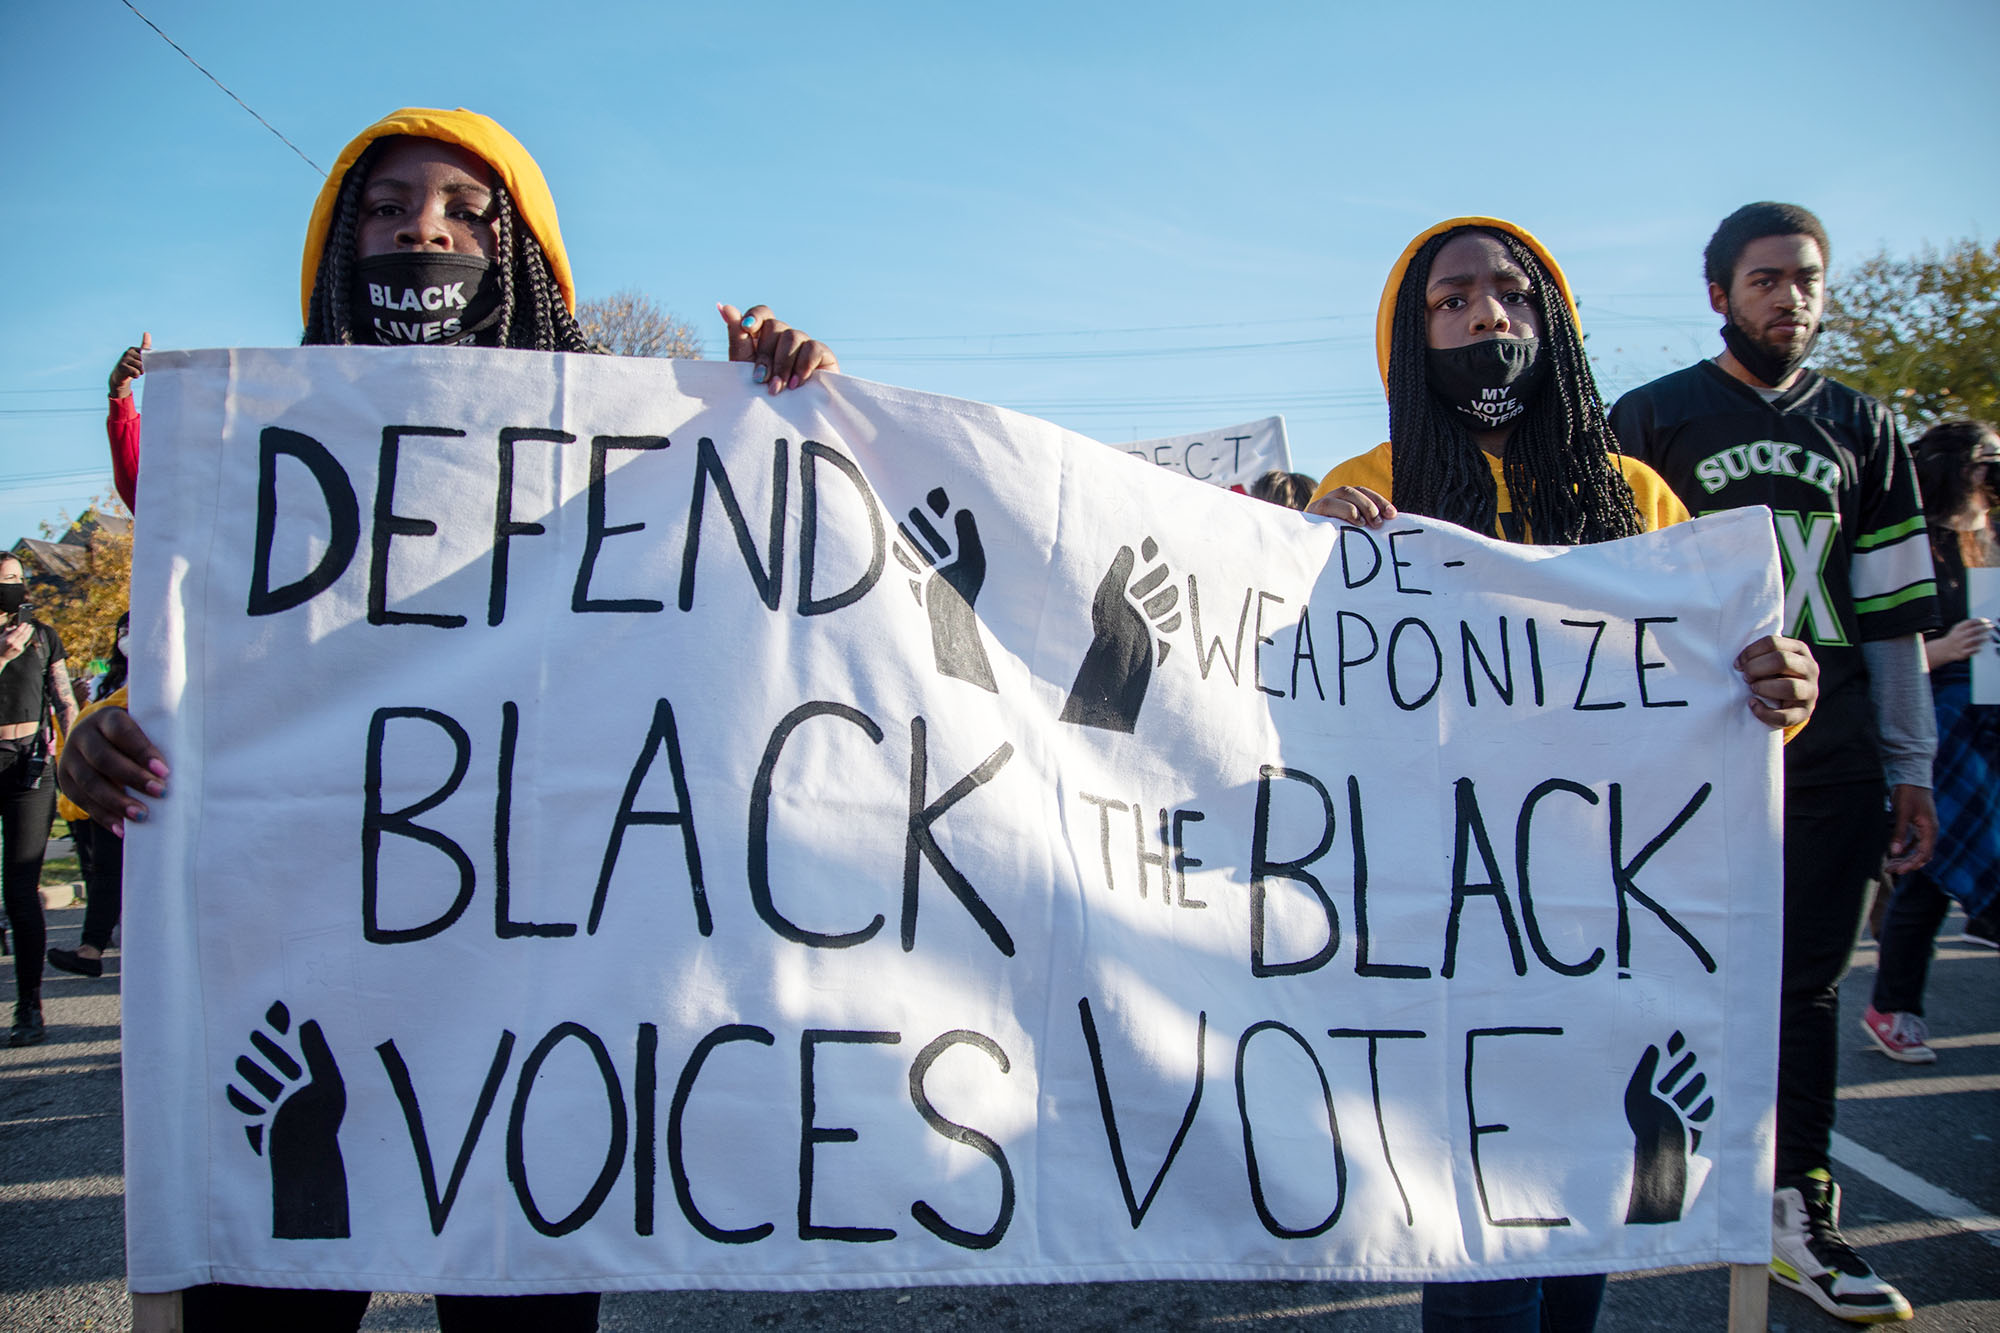 PHOTO: Activists from 12 local organizations marched through the city to call for the protection of Detroits votes over concerns of Donald Trumps claims that Democrats stole the election in Detroit, Nov. 7, 2020.